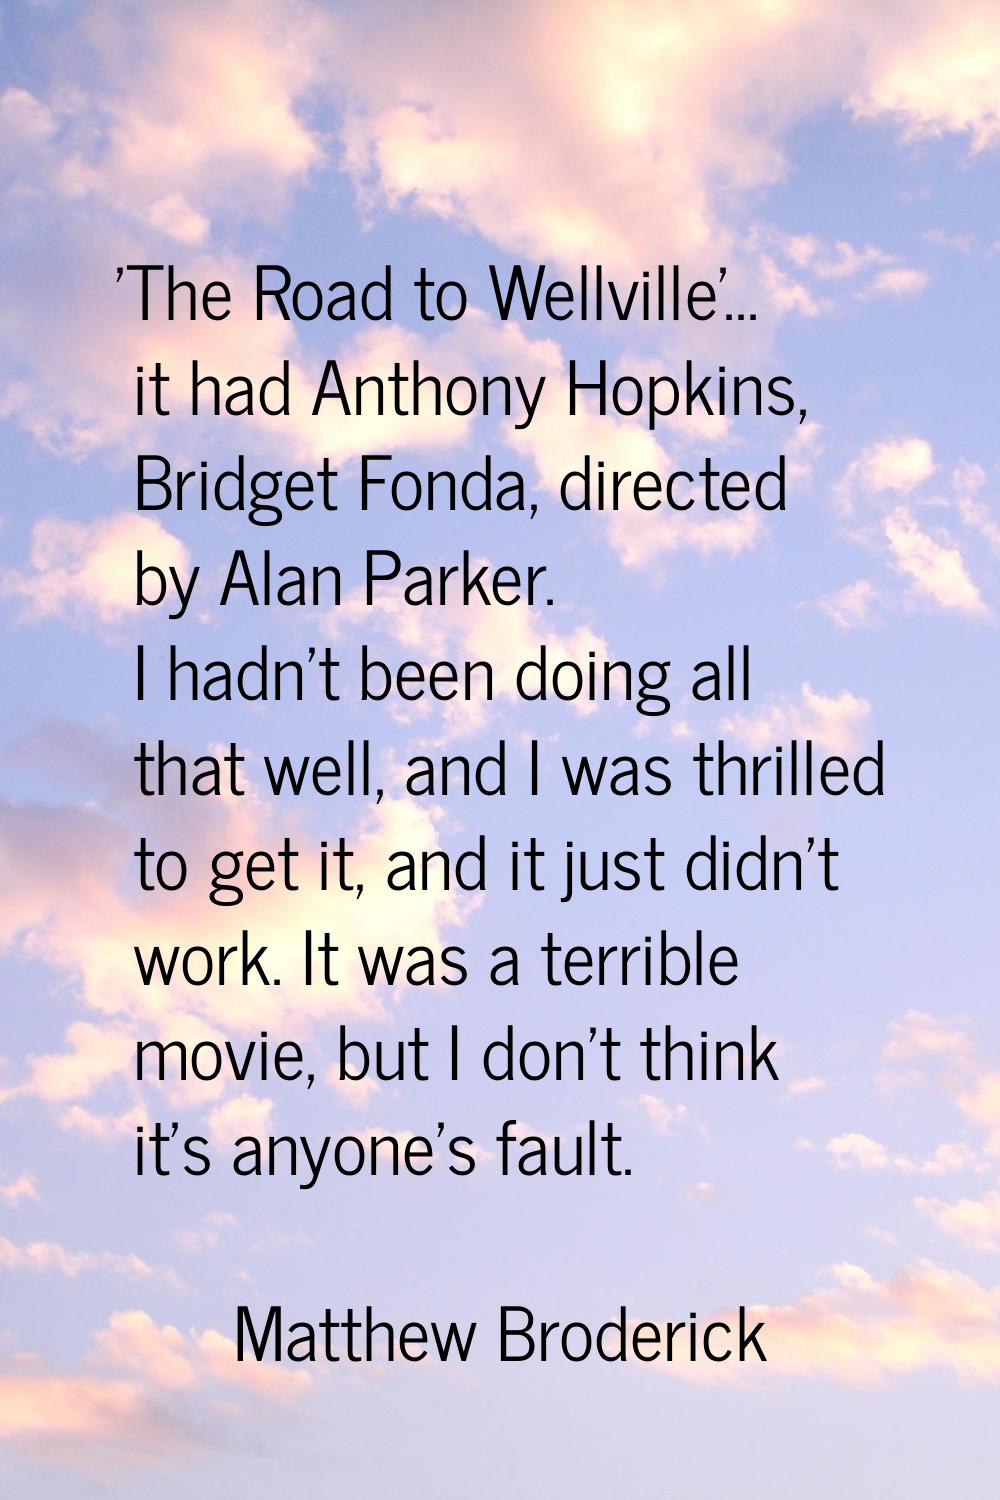 'The Road to Wellville'... it had Anthony Hopkins, Bridget Fonda, directed by Alan Parker. I hadn't